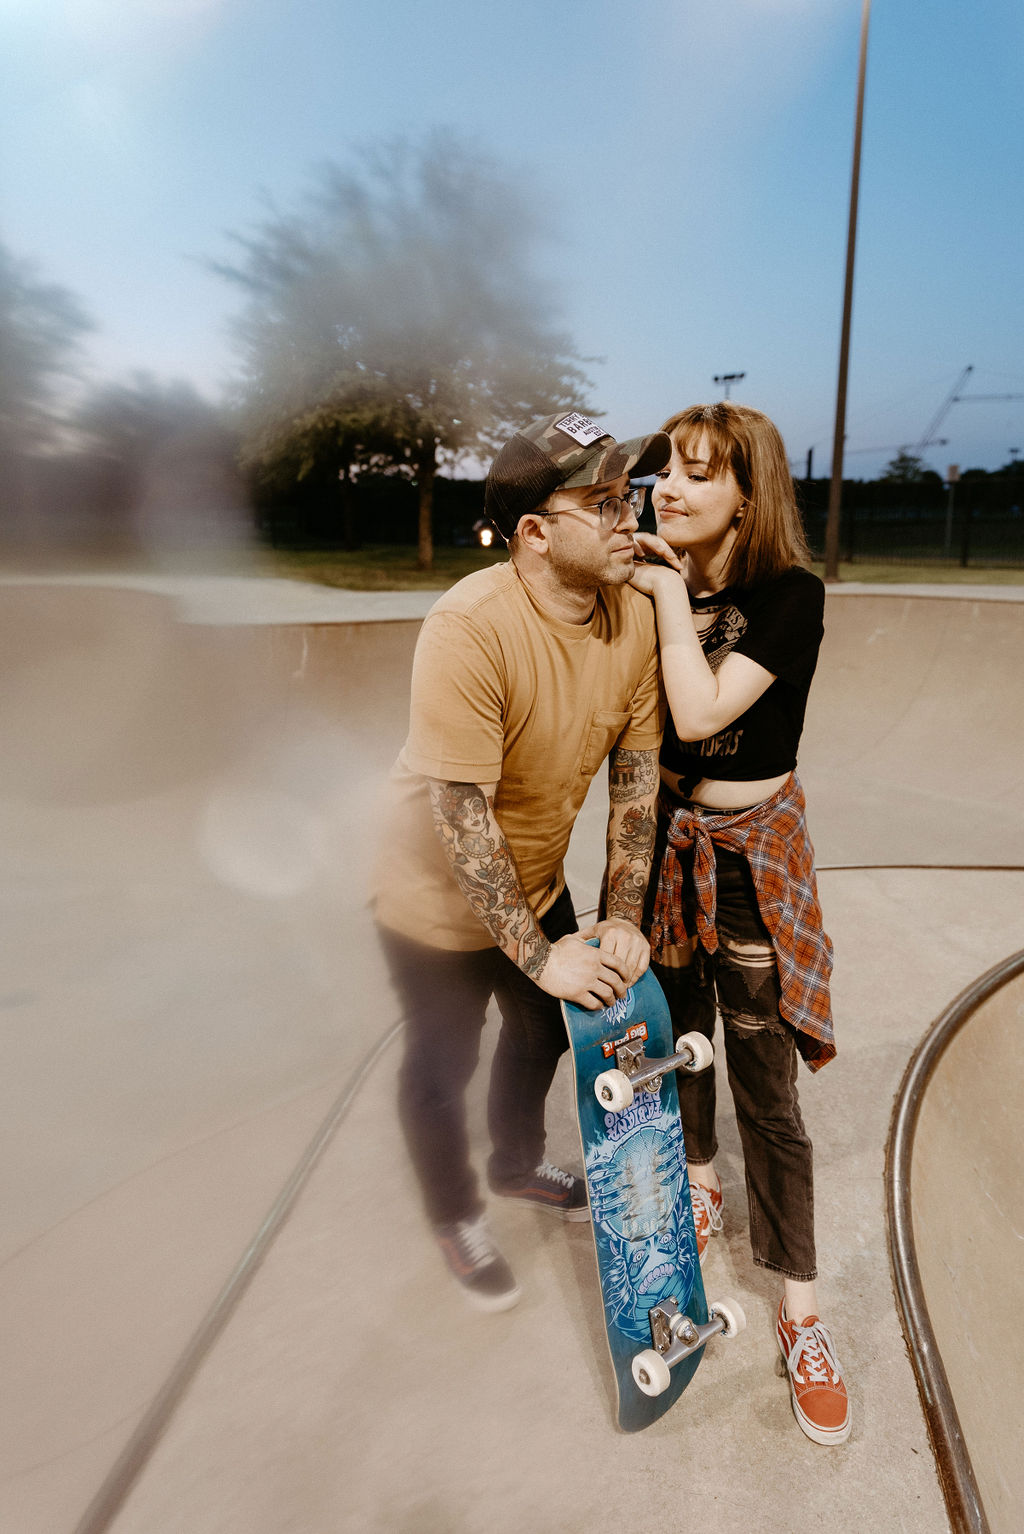 Couple hanging out at the skatepark together in Allen Texas